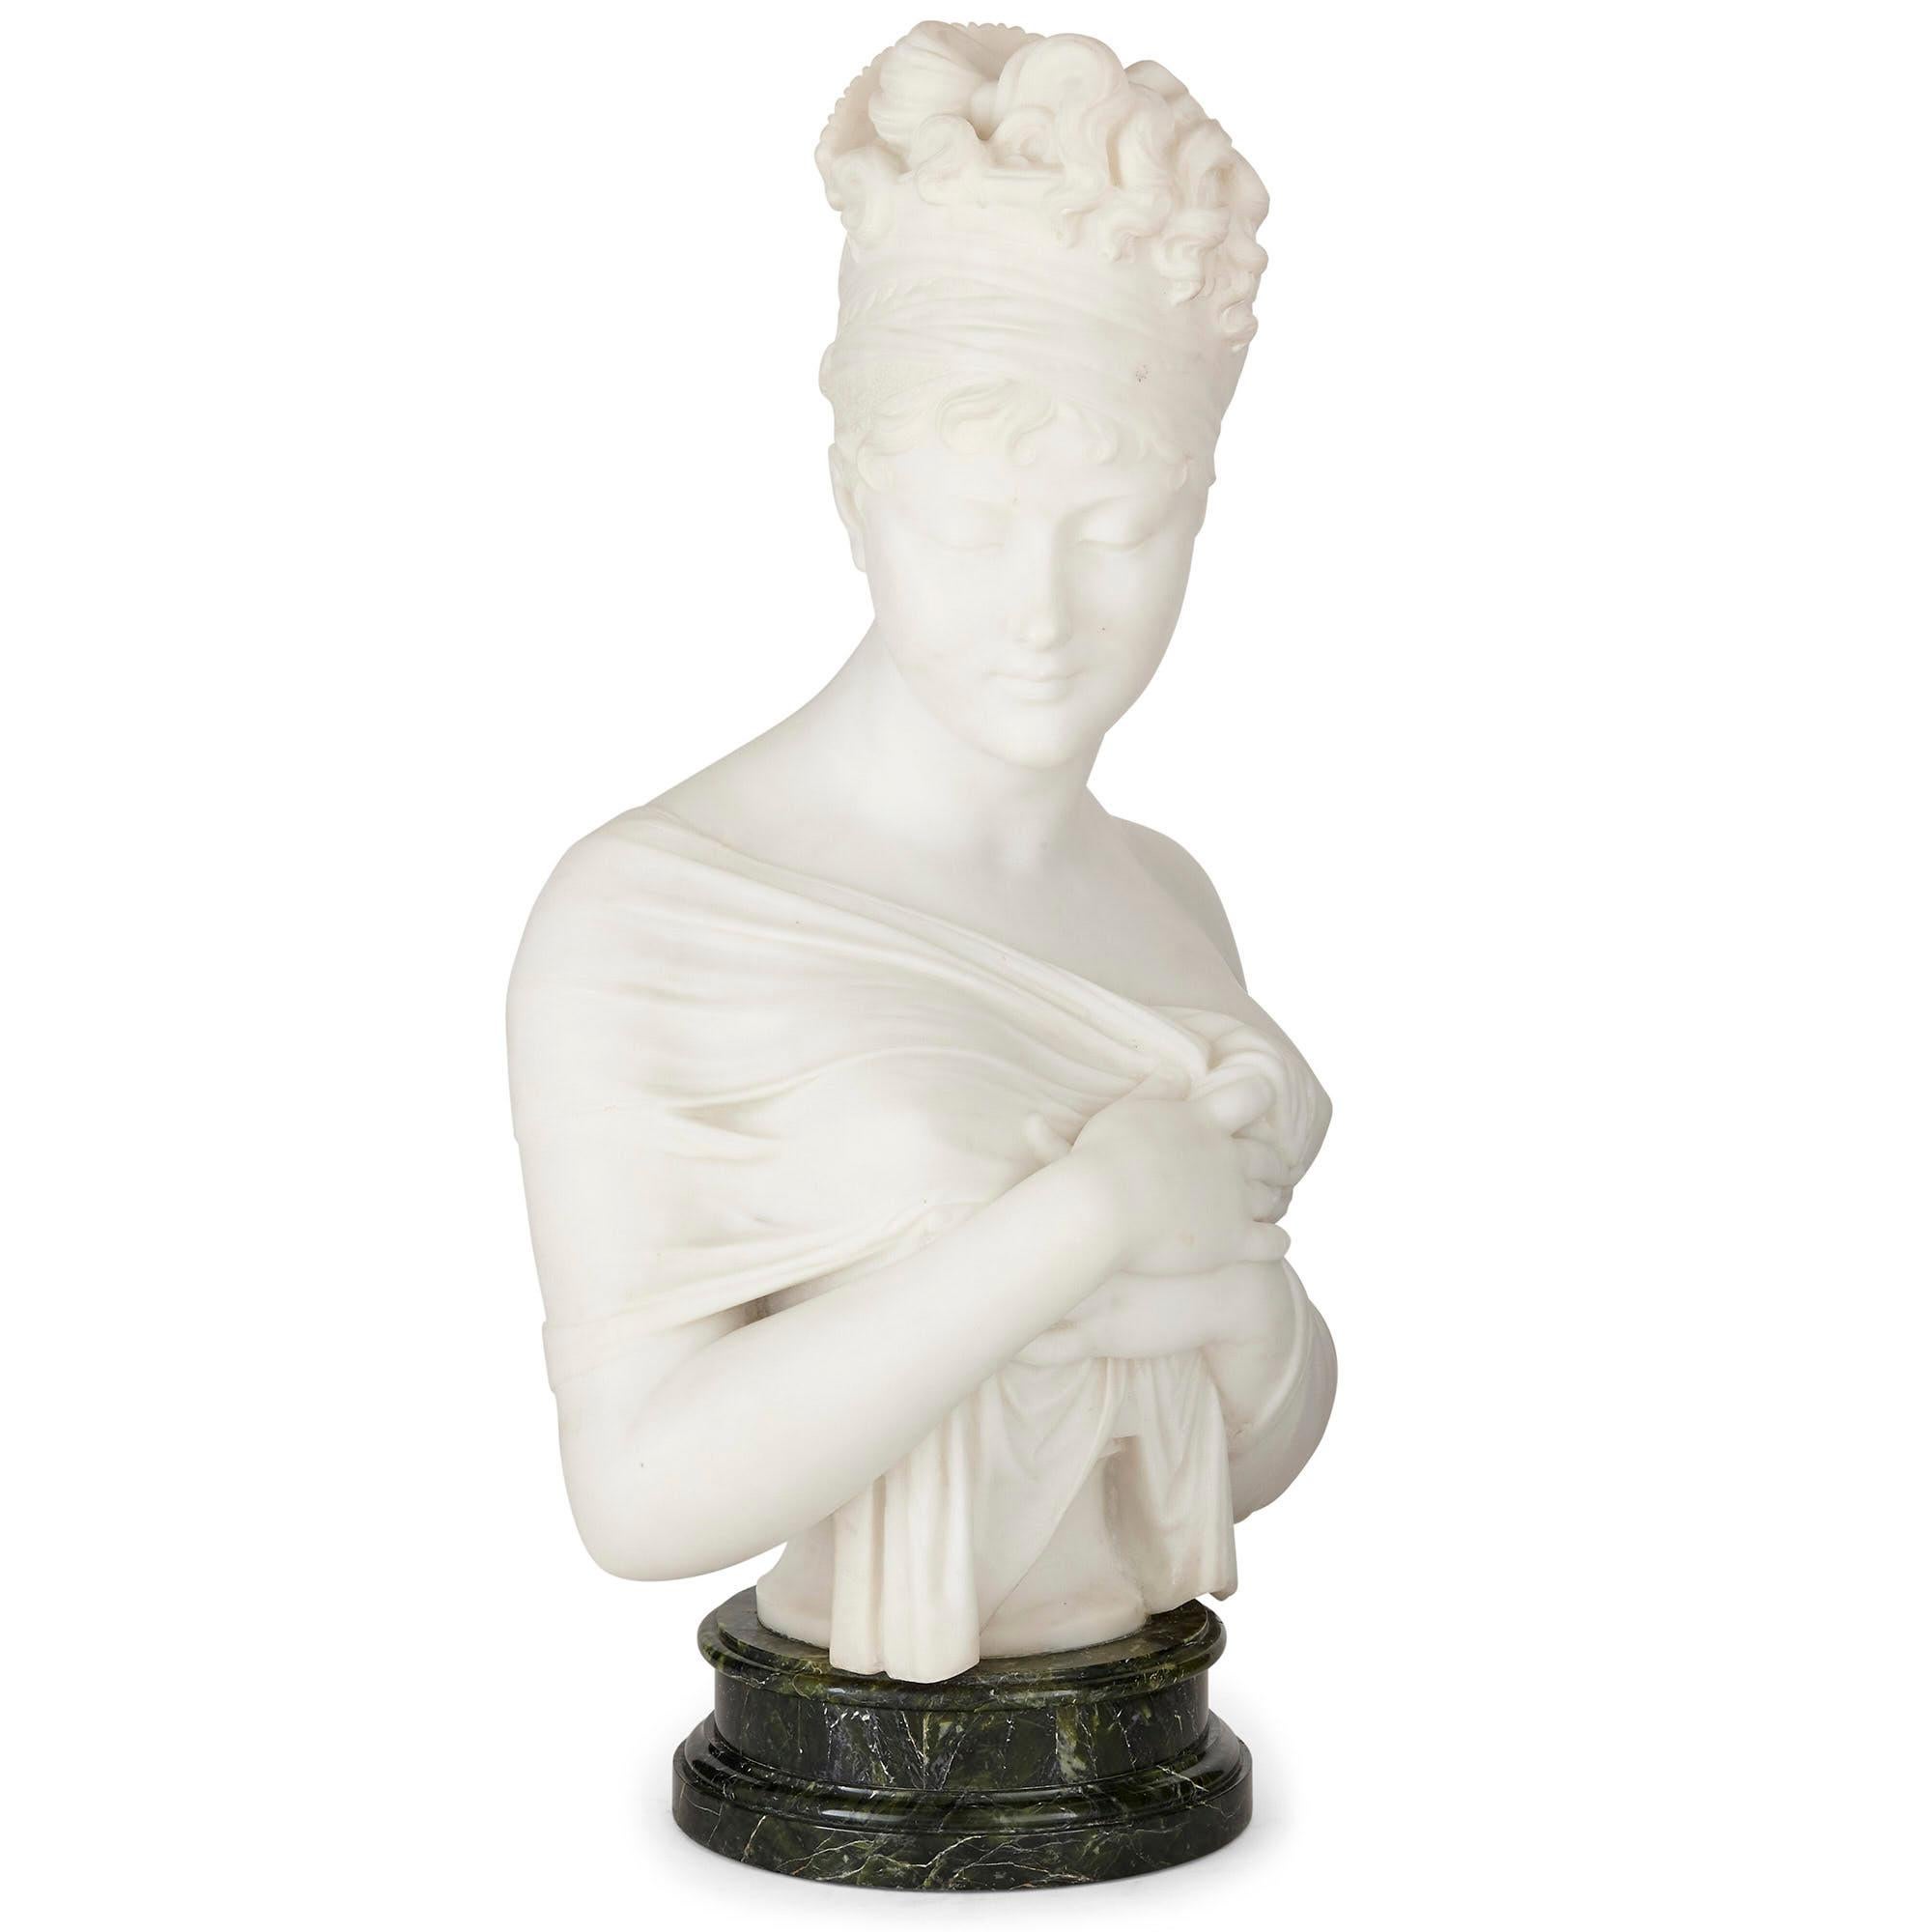 Neoclassical marble sculpture bust after Joseph Chinard
French, late 19th century
Measures: Height 65cm, width 34cm, depth 55cm

Portraying Madame Récamier, a leading proponent of the neoclassical style in early 19th century France, this marble